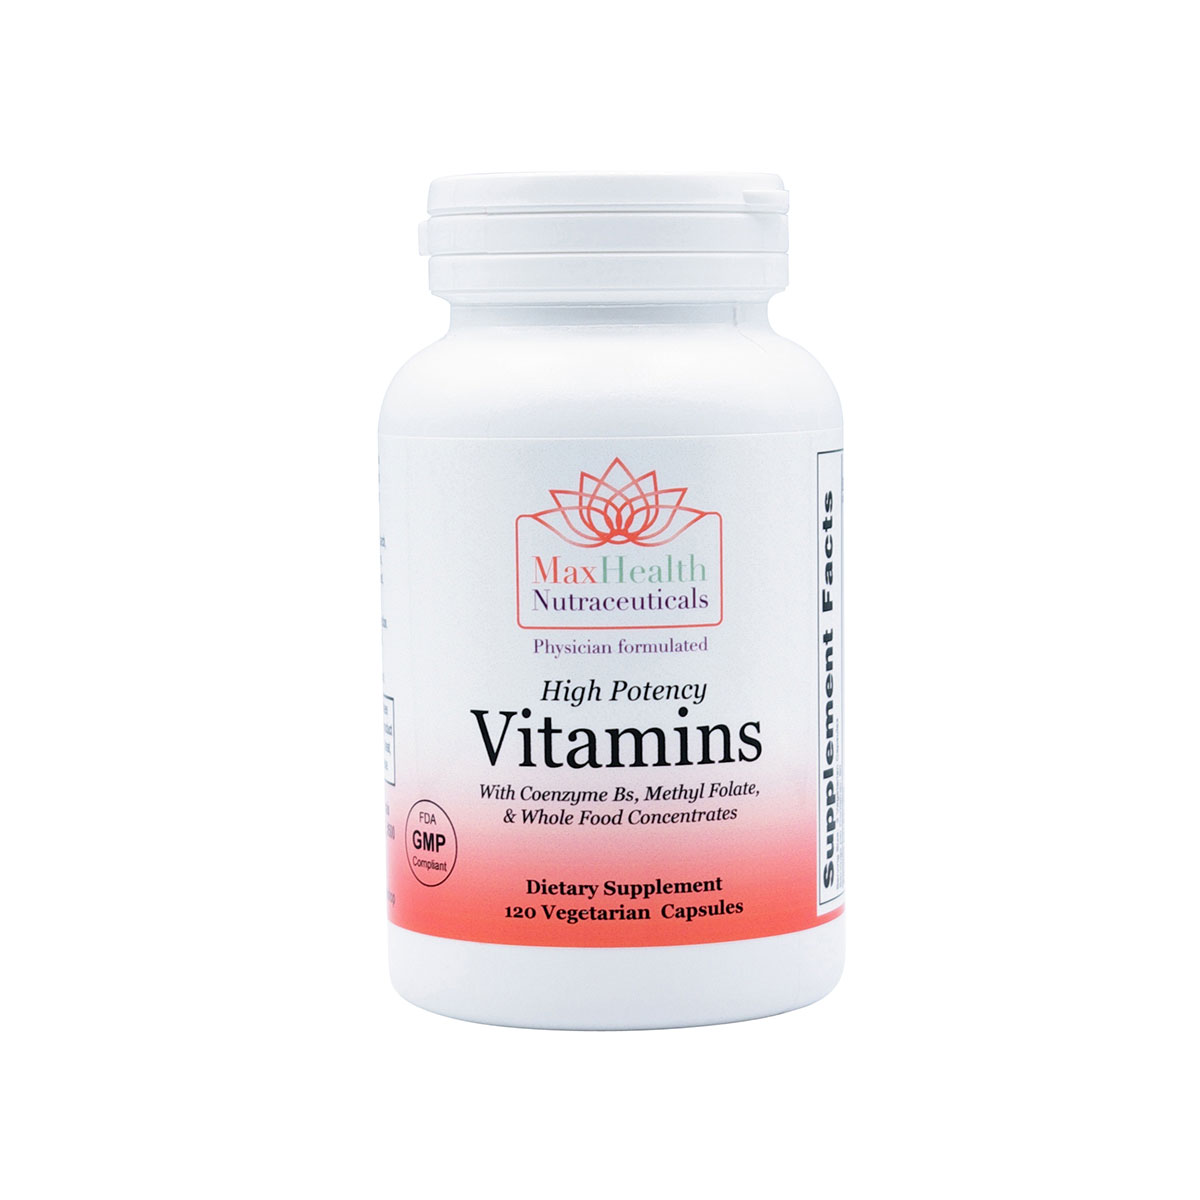 11High Potency Vitamins with Coenzyme Bs, Methyl Folate, and Whole Food Concentrates 120s Capsules